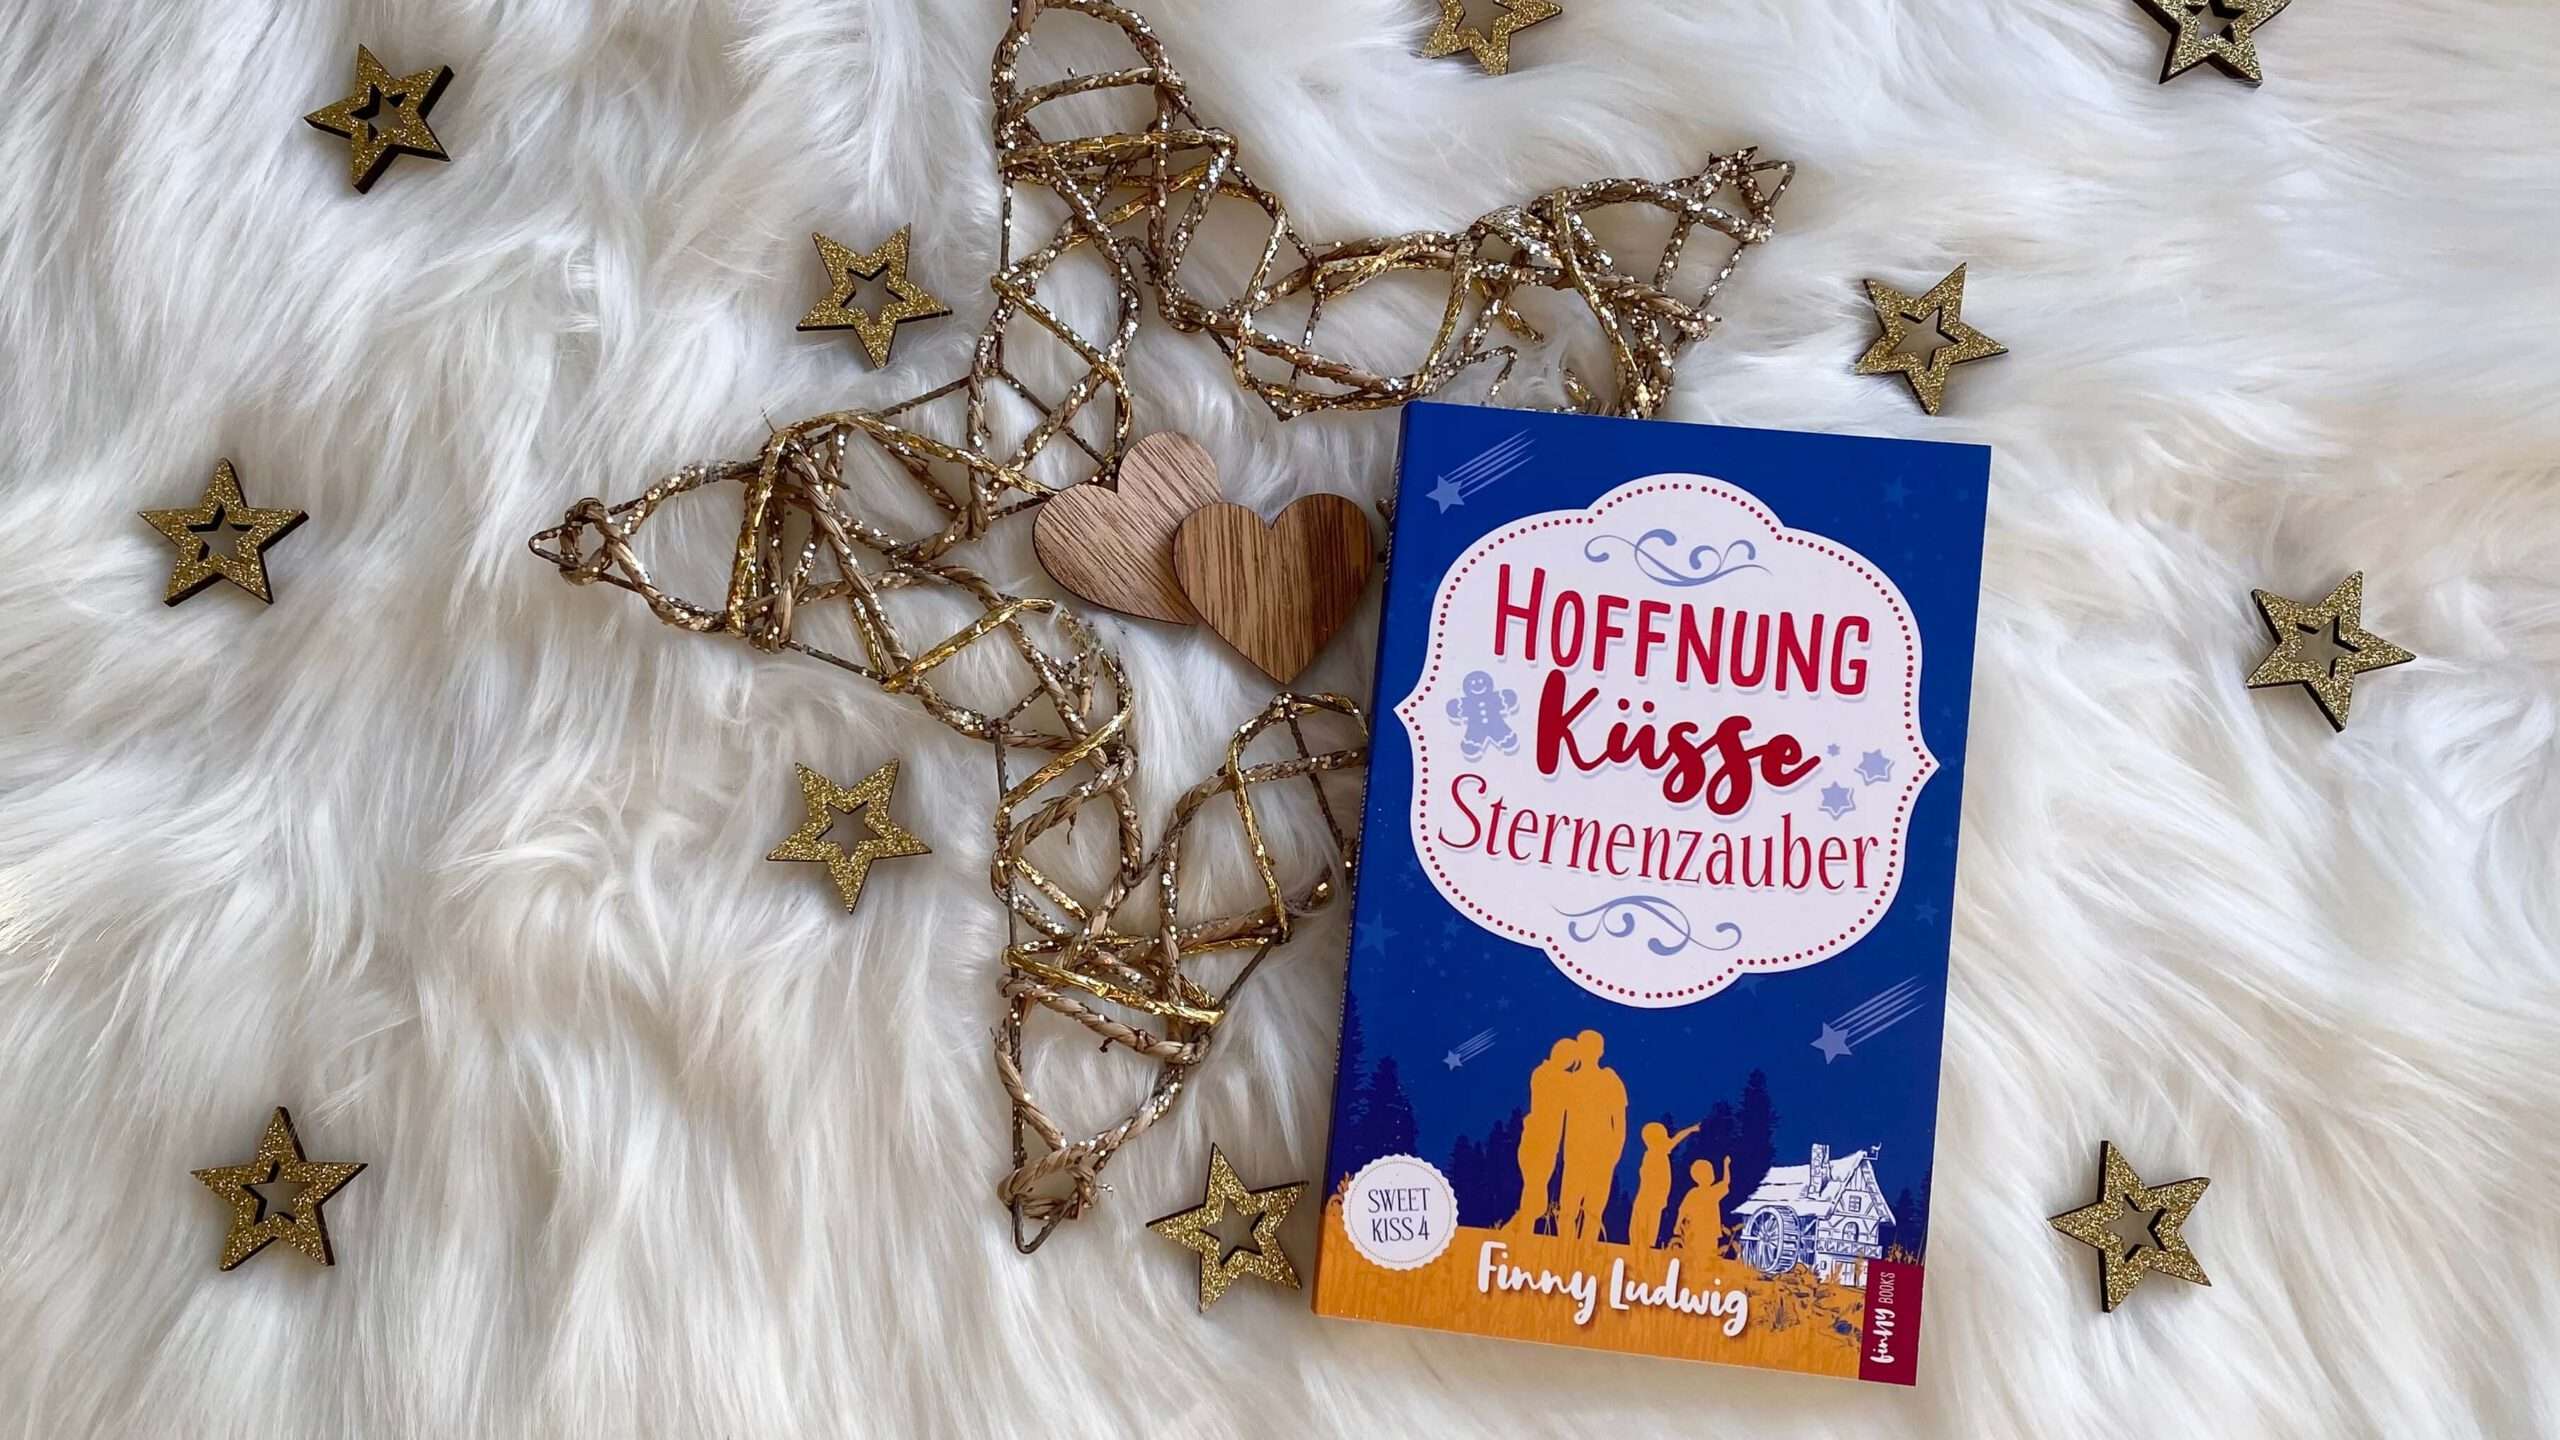 You are currently viewing „Hoffnung Küsse Sternenzauber“ von Finny Ludwig